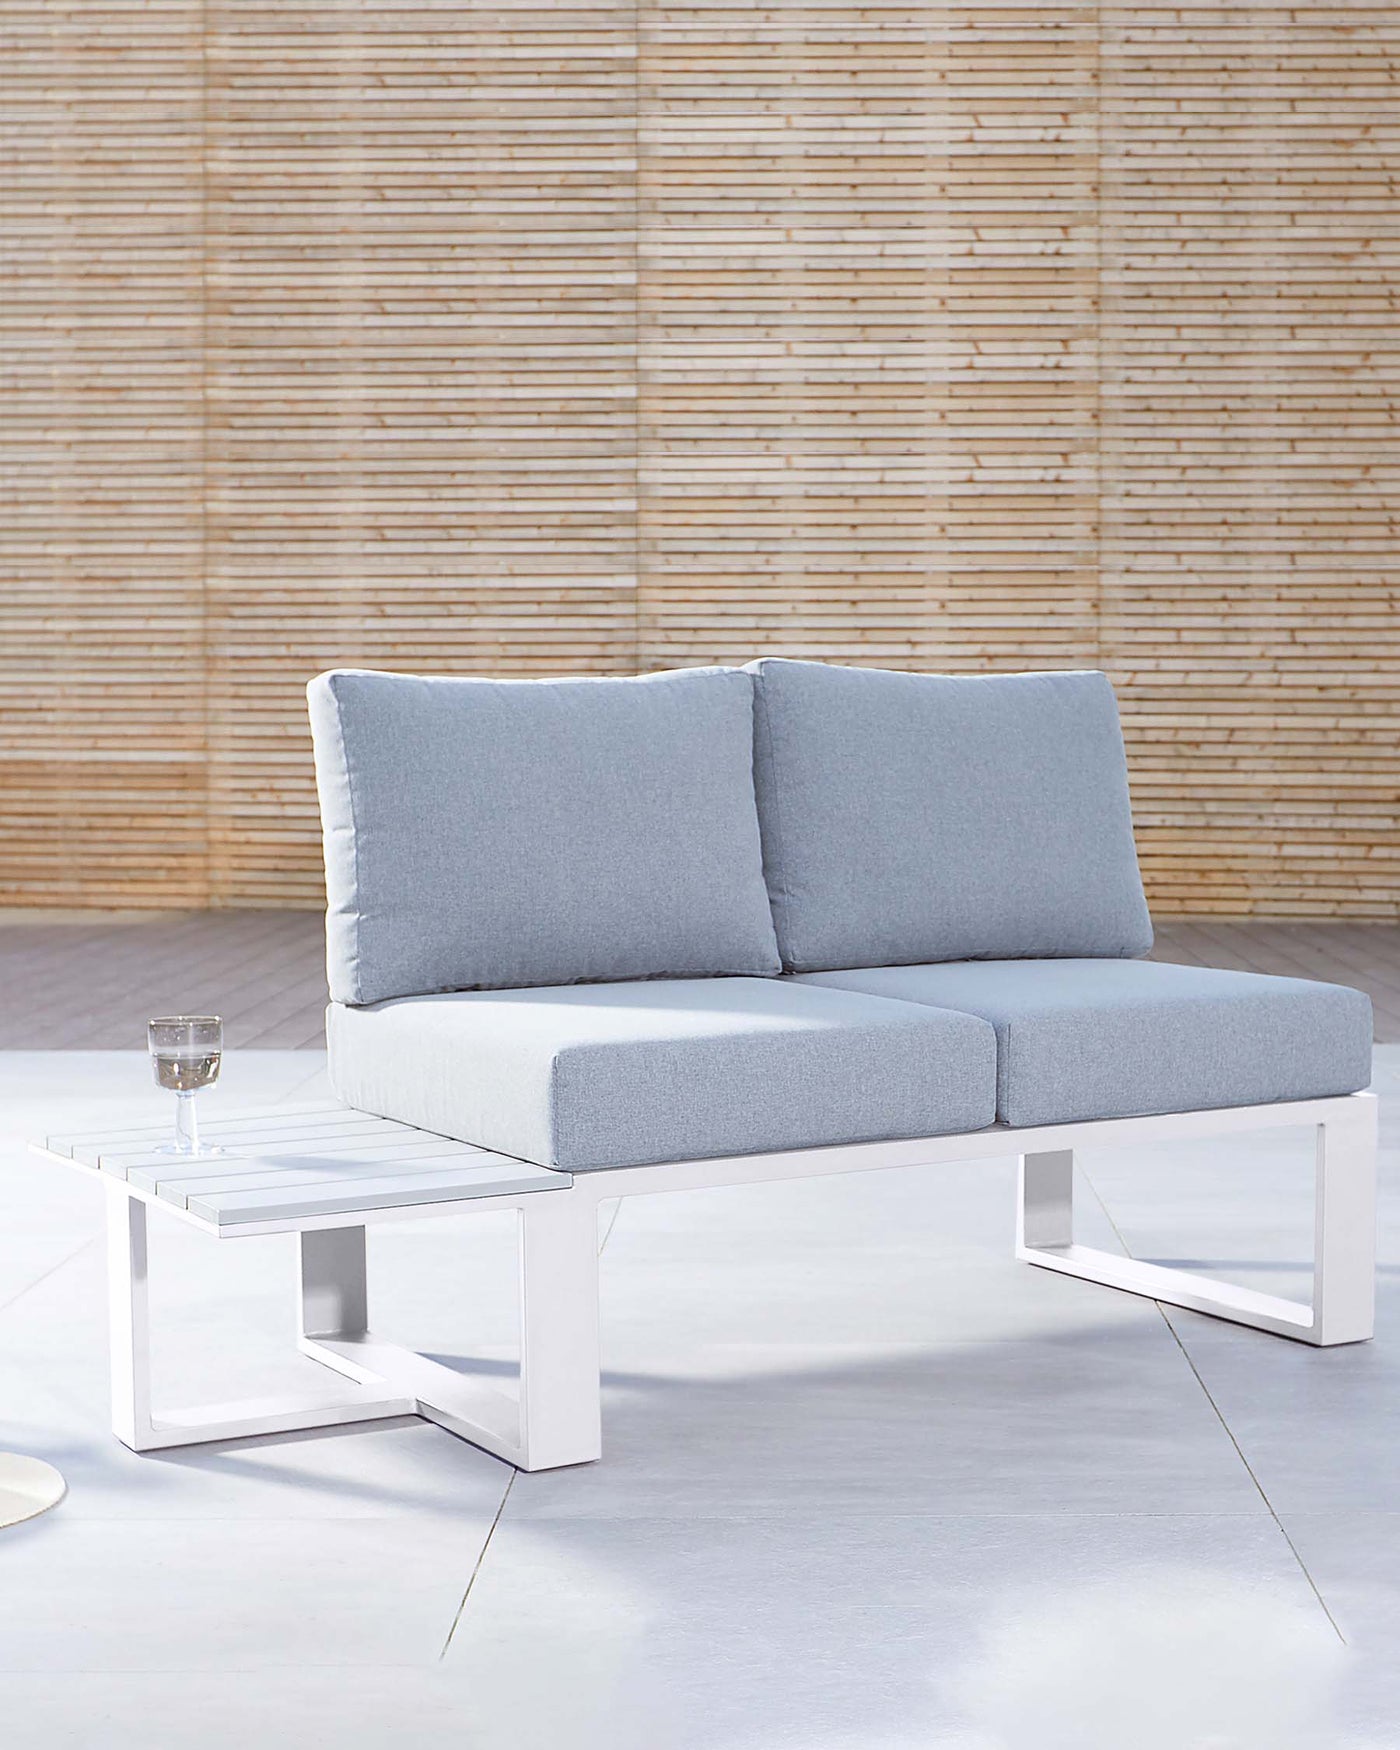 Modern two-seater outdoor sofa with light grey cushions and white metal frame, accompanied by a white rectangular low coffee table with a glass of water on top, positioned on a light concrete patio against a bamboo backdrop.